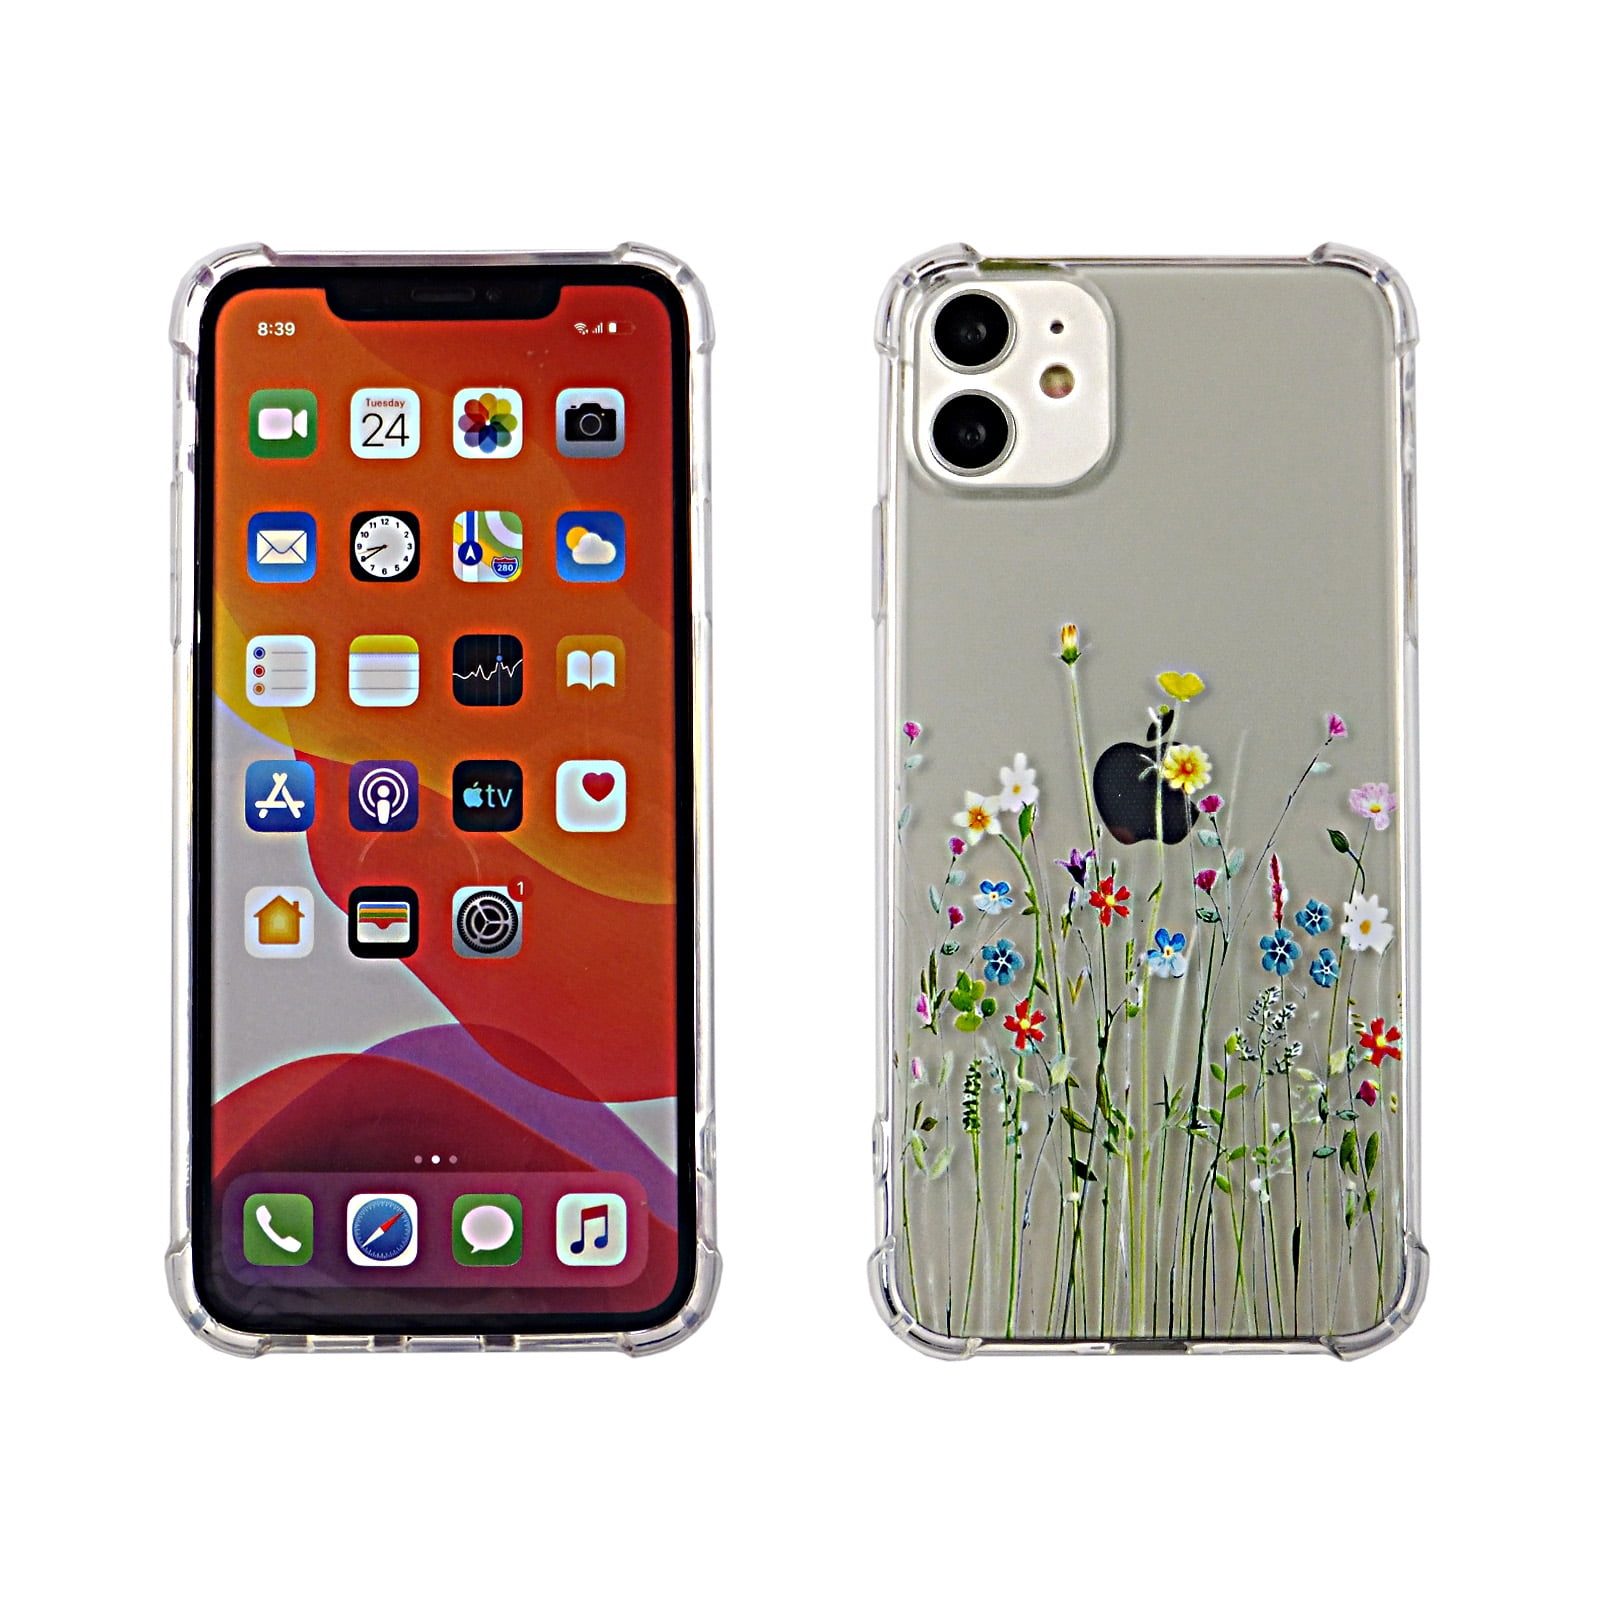 Transparent Case with Shock Absorbing 3D Corners Crystal Clear Protective Phone Case Soft TPU Silicone Cover Moozy Shockproof Silicone Case for Xiaomi Redmi 7 